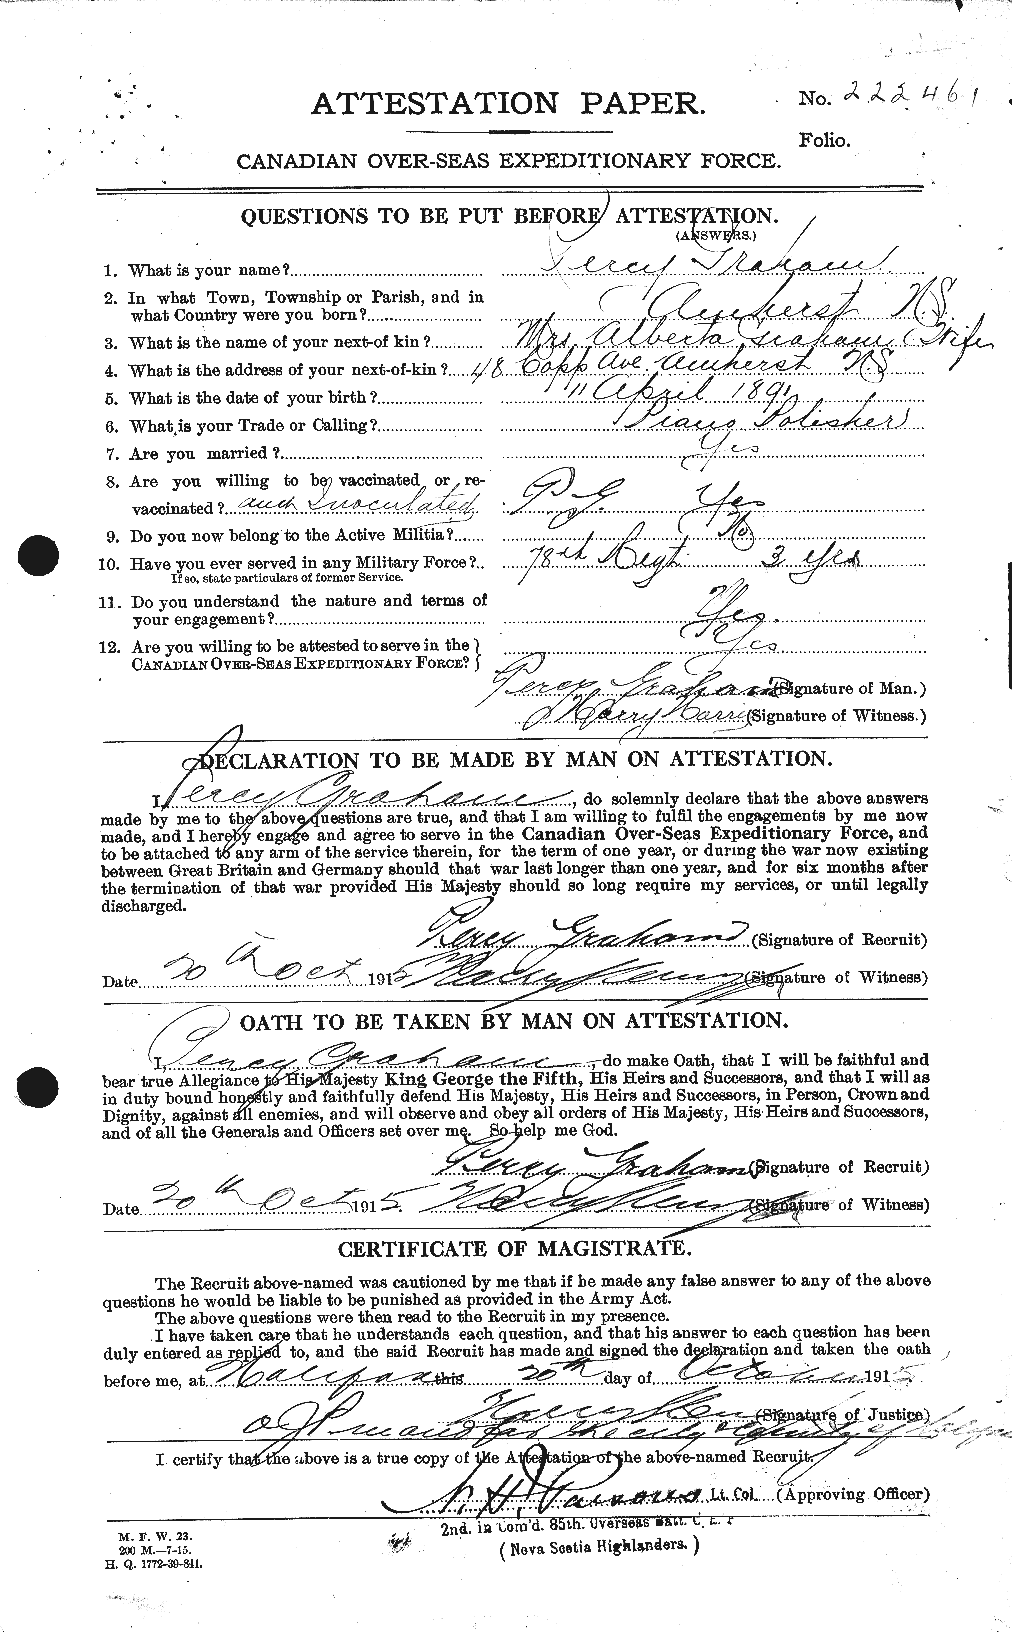 Personnel Records of the First World War - CEF 359337a